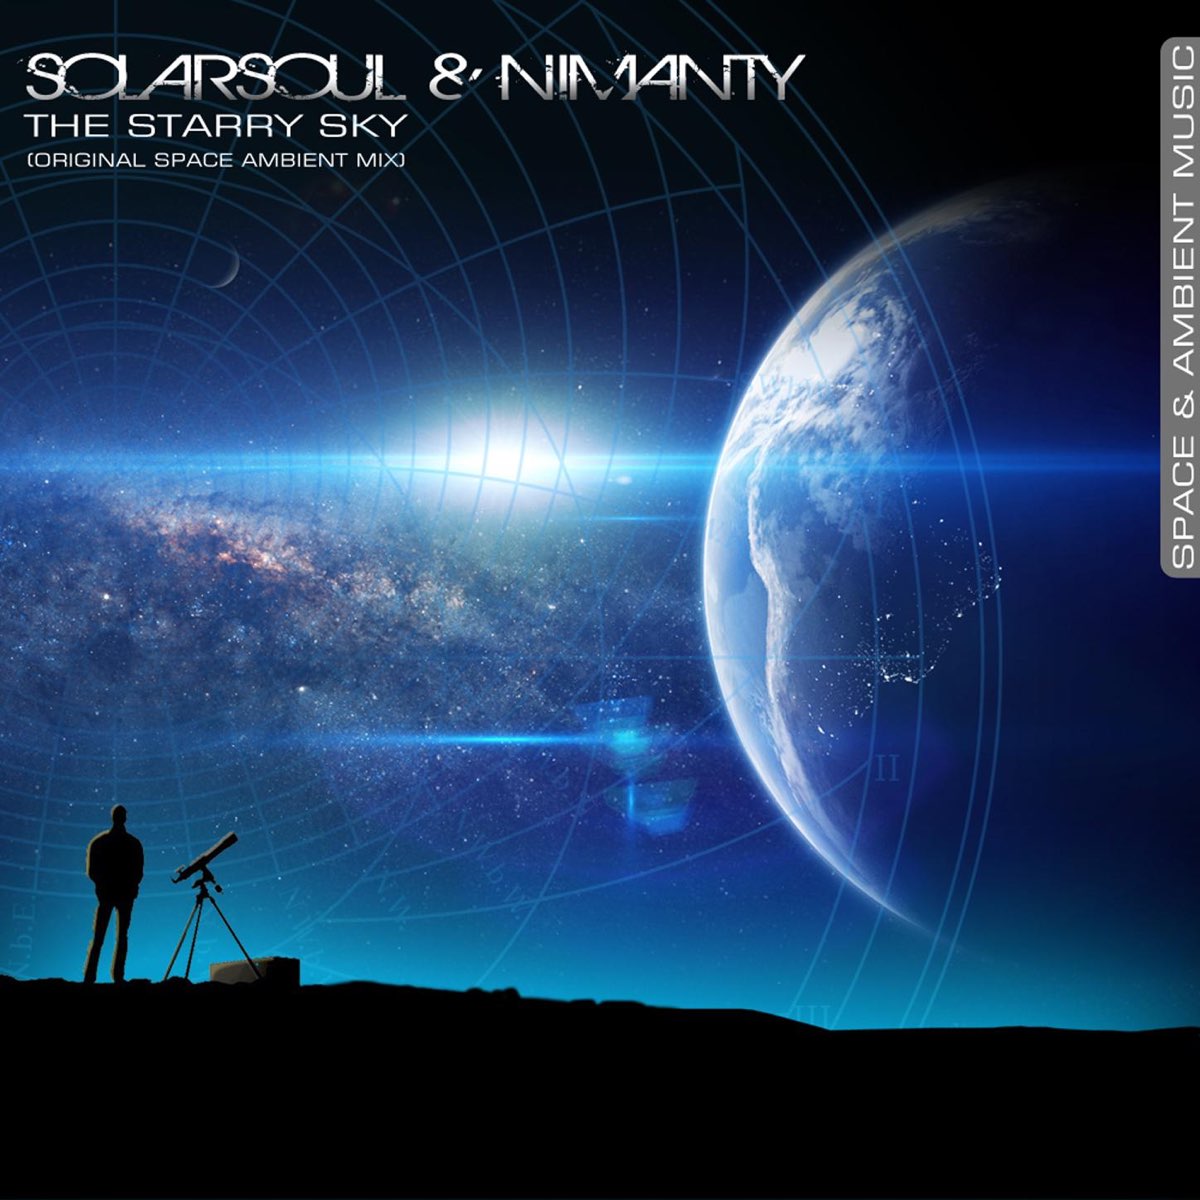 The Starry (Original Space Ambient Mix) EP by Nimanty Solarsoul on Apple Music